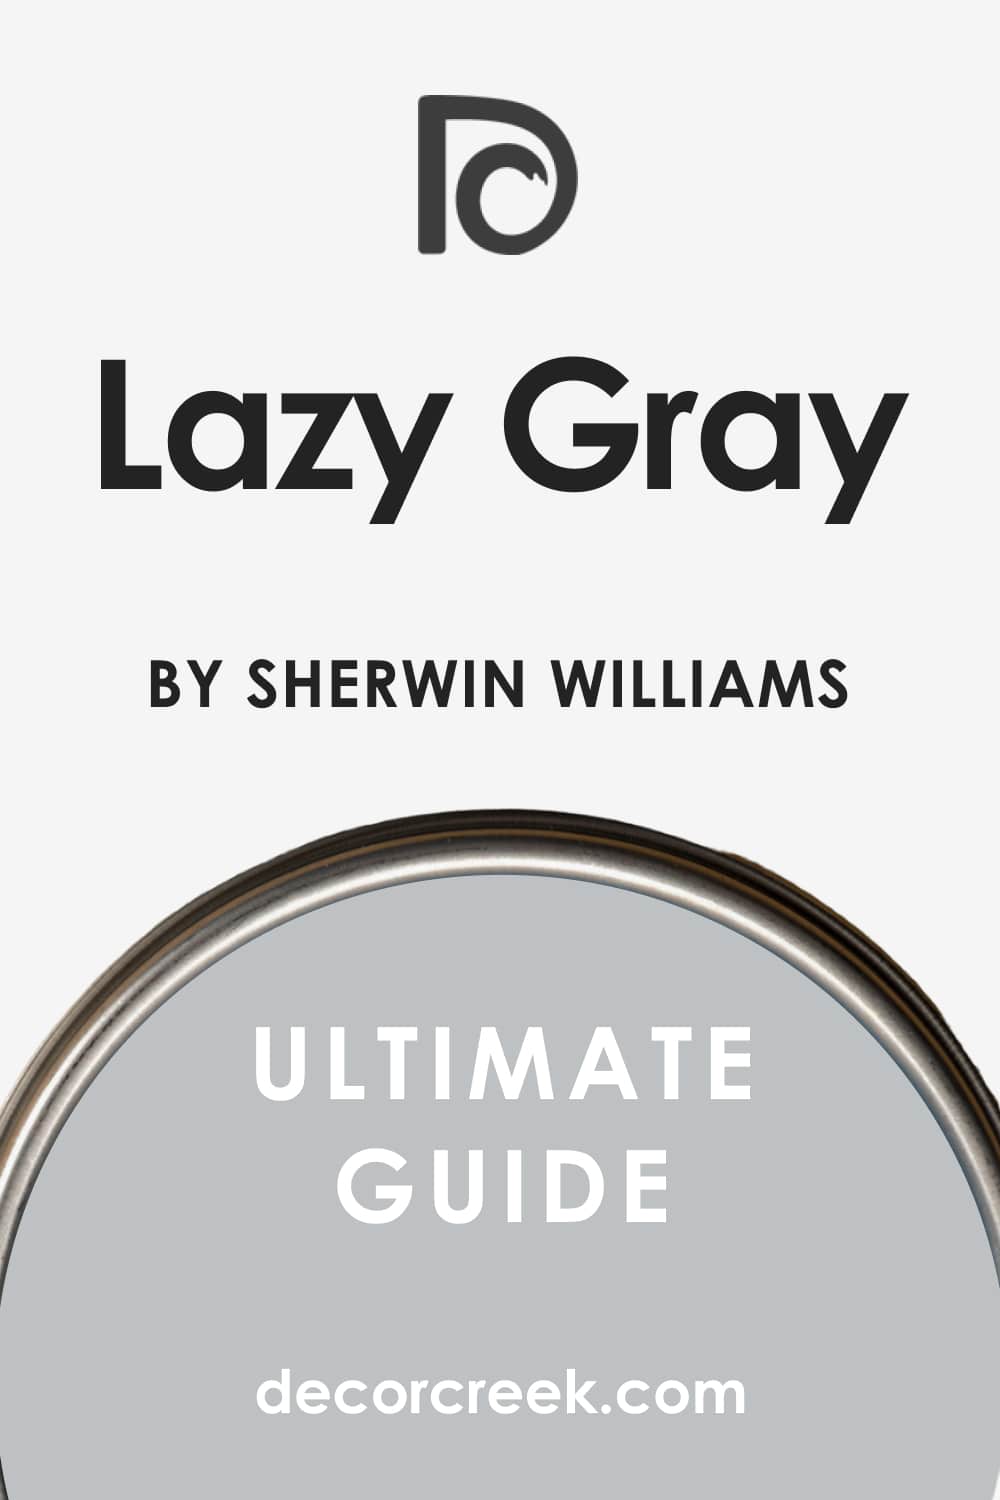 Ultimate Guide of Lazy Gray SW-6254 